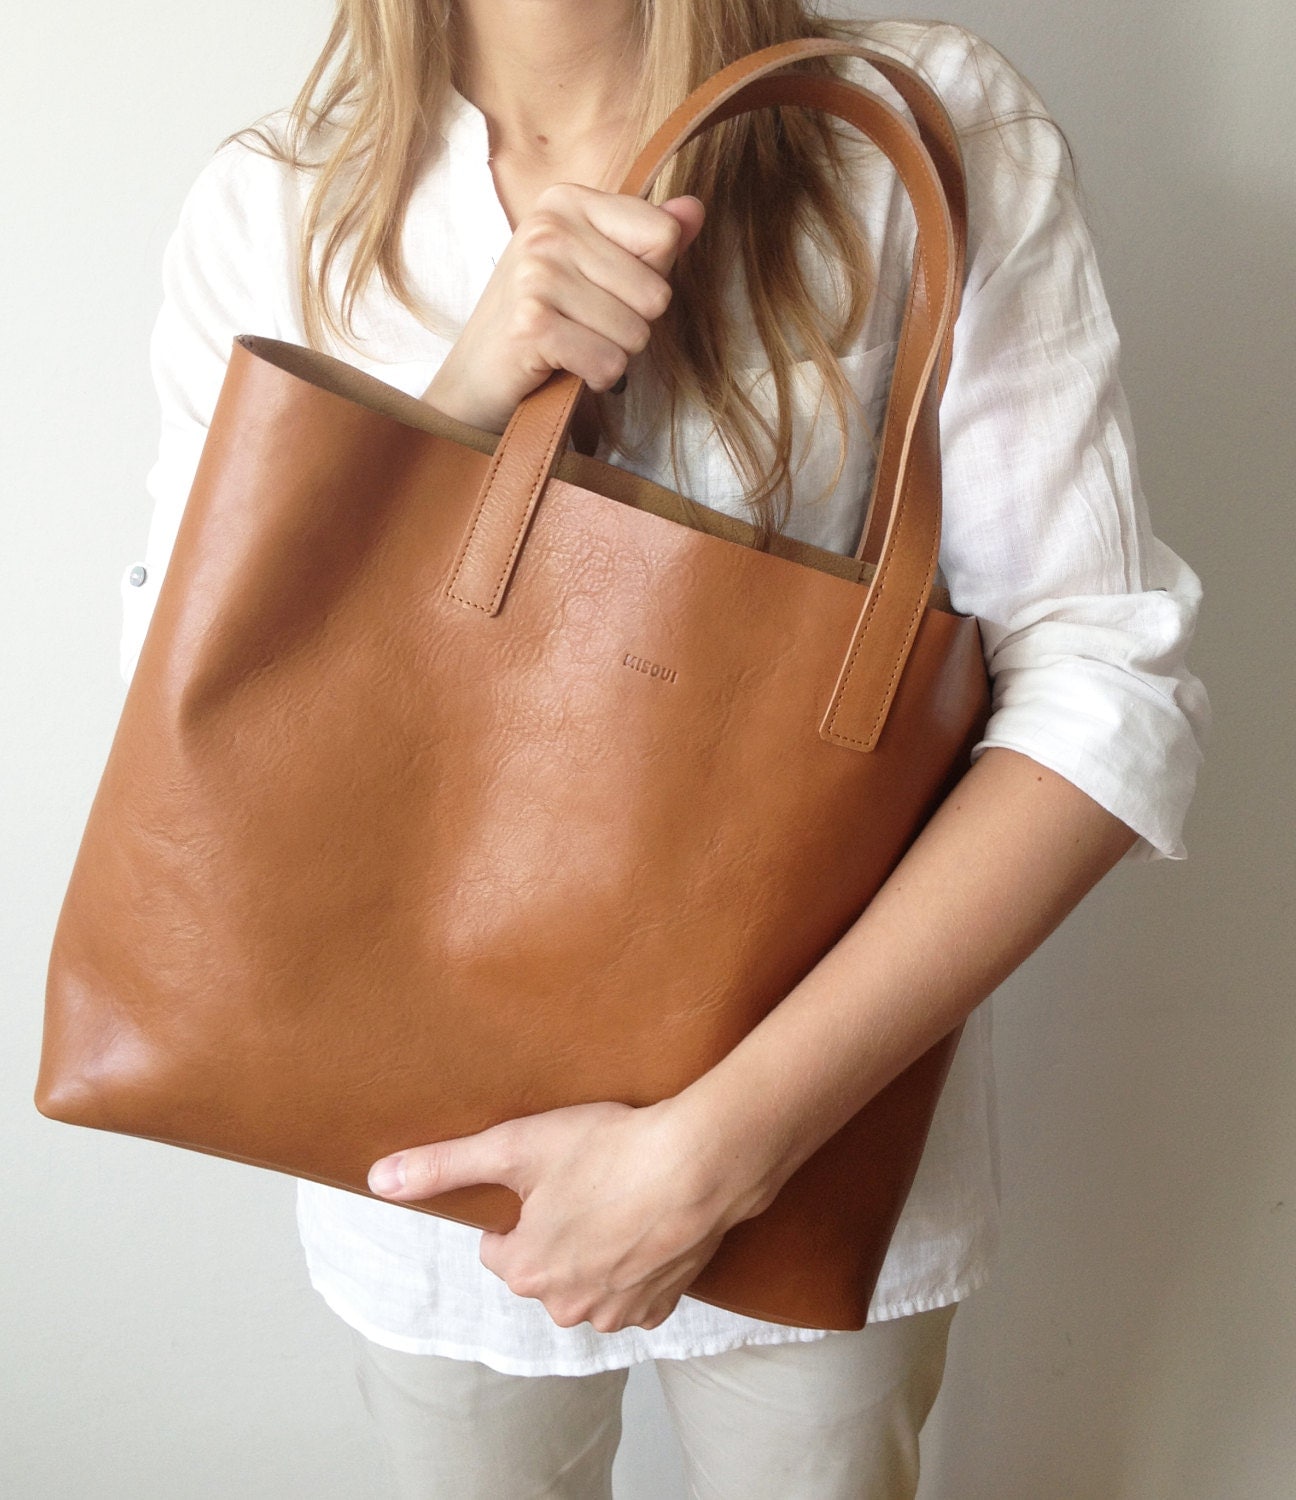 MIVO Medium Light Brown Leather Tote Honey leather tote